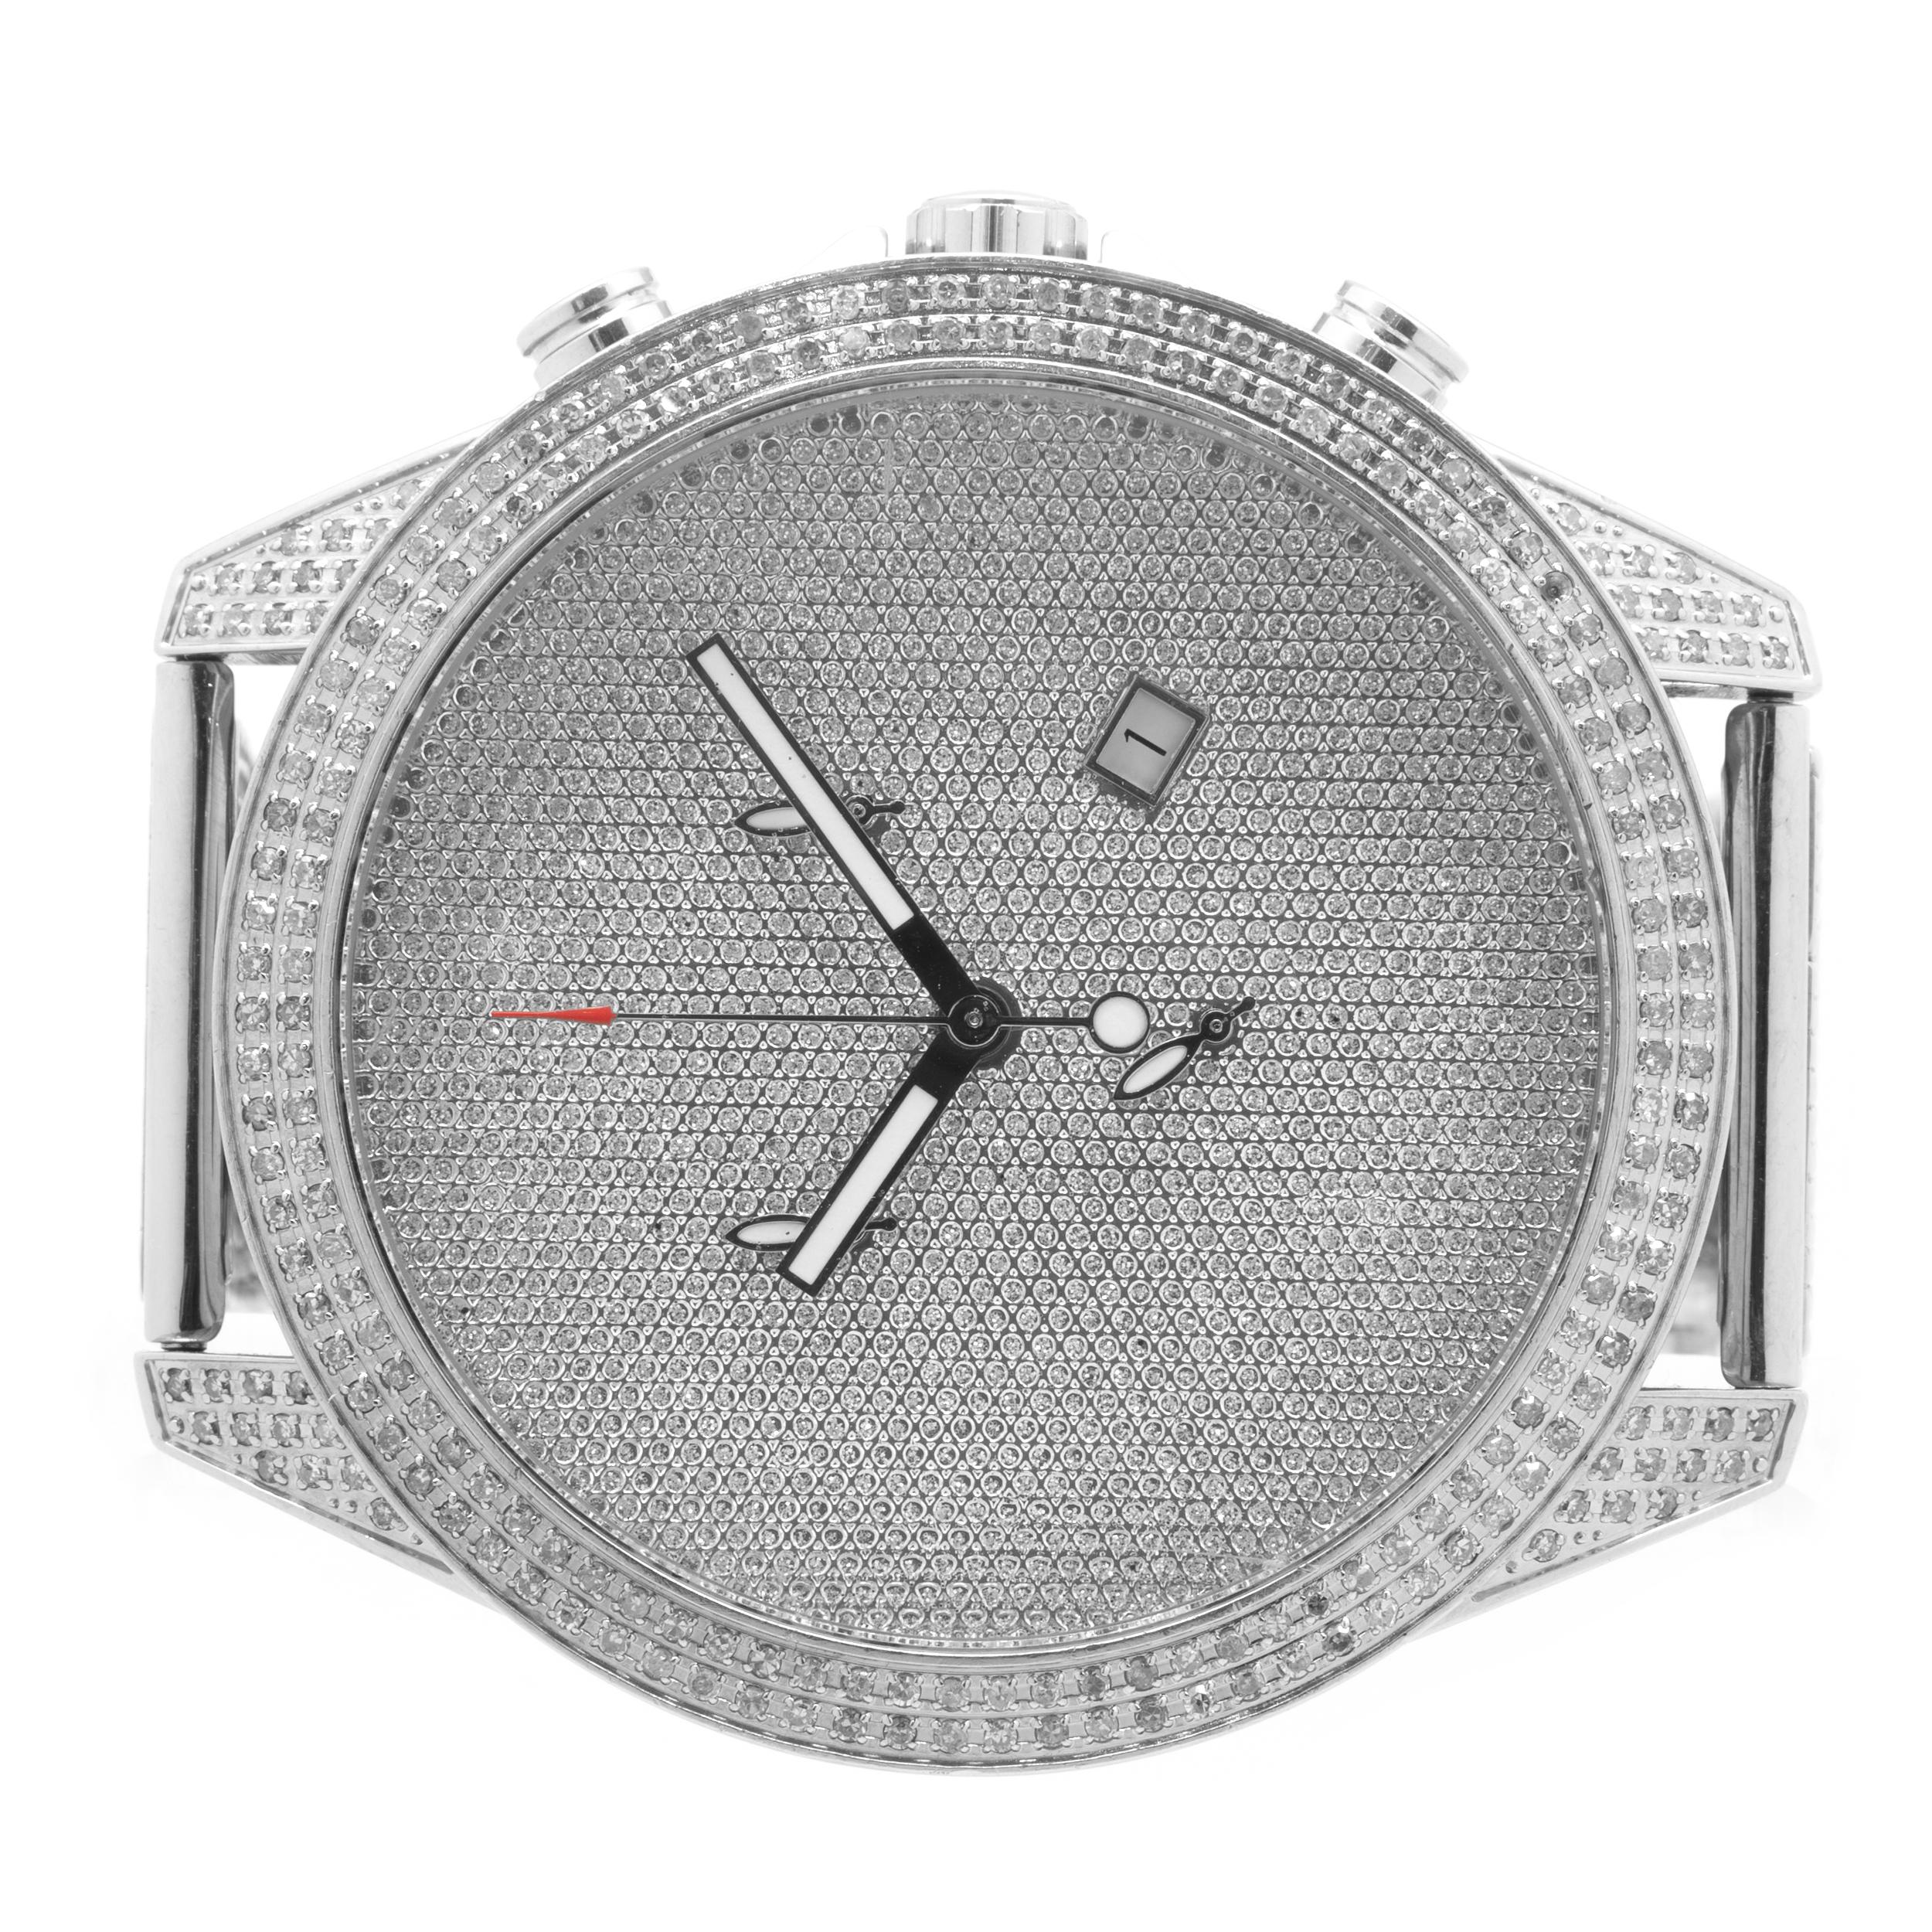 Movement: quartz
Function: hours, minutes, seconds, date, chronograph
Case: 47mm stainless steel round diamond case
Bracelet: stainless steel mesh bracelet
Dial: pave chronograph dial
Serial # JGXXX
Reference # Glory

 No box or papers